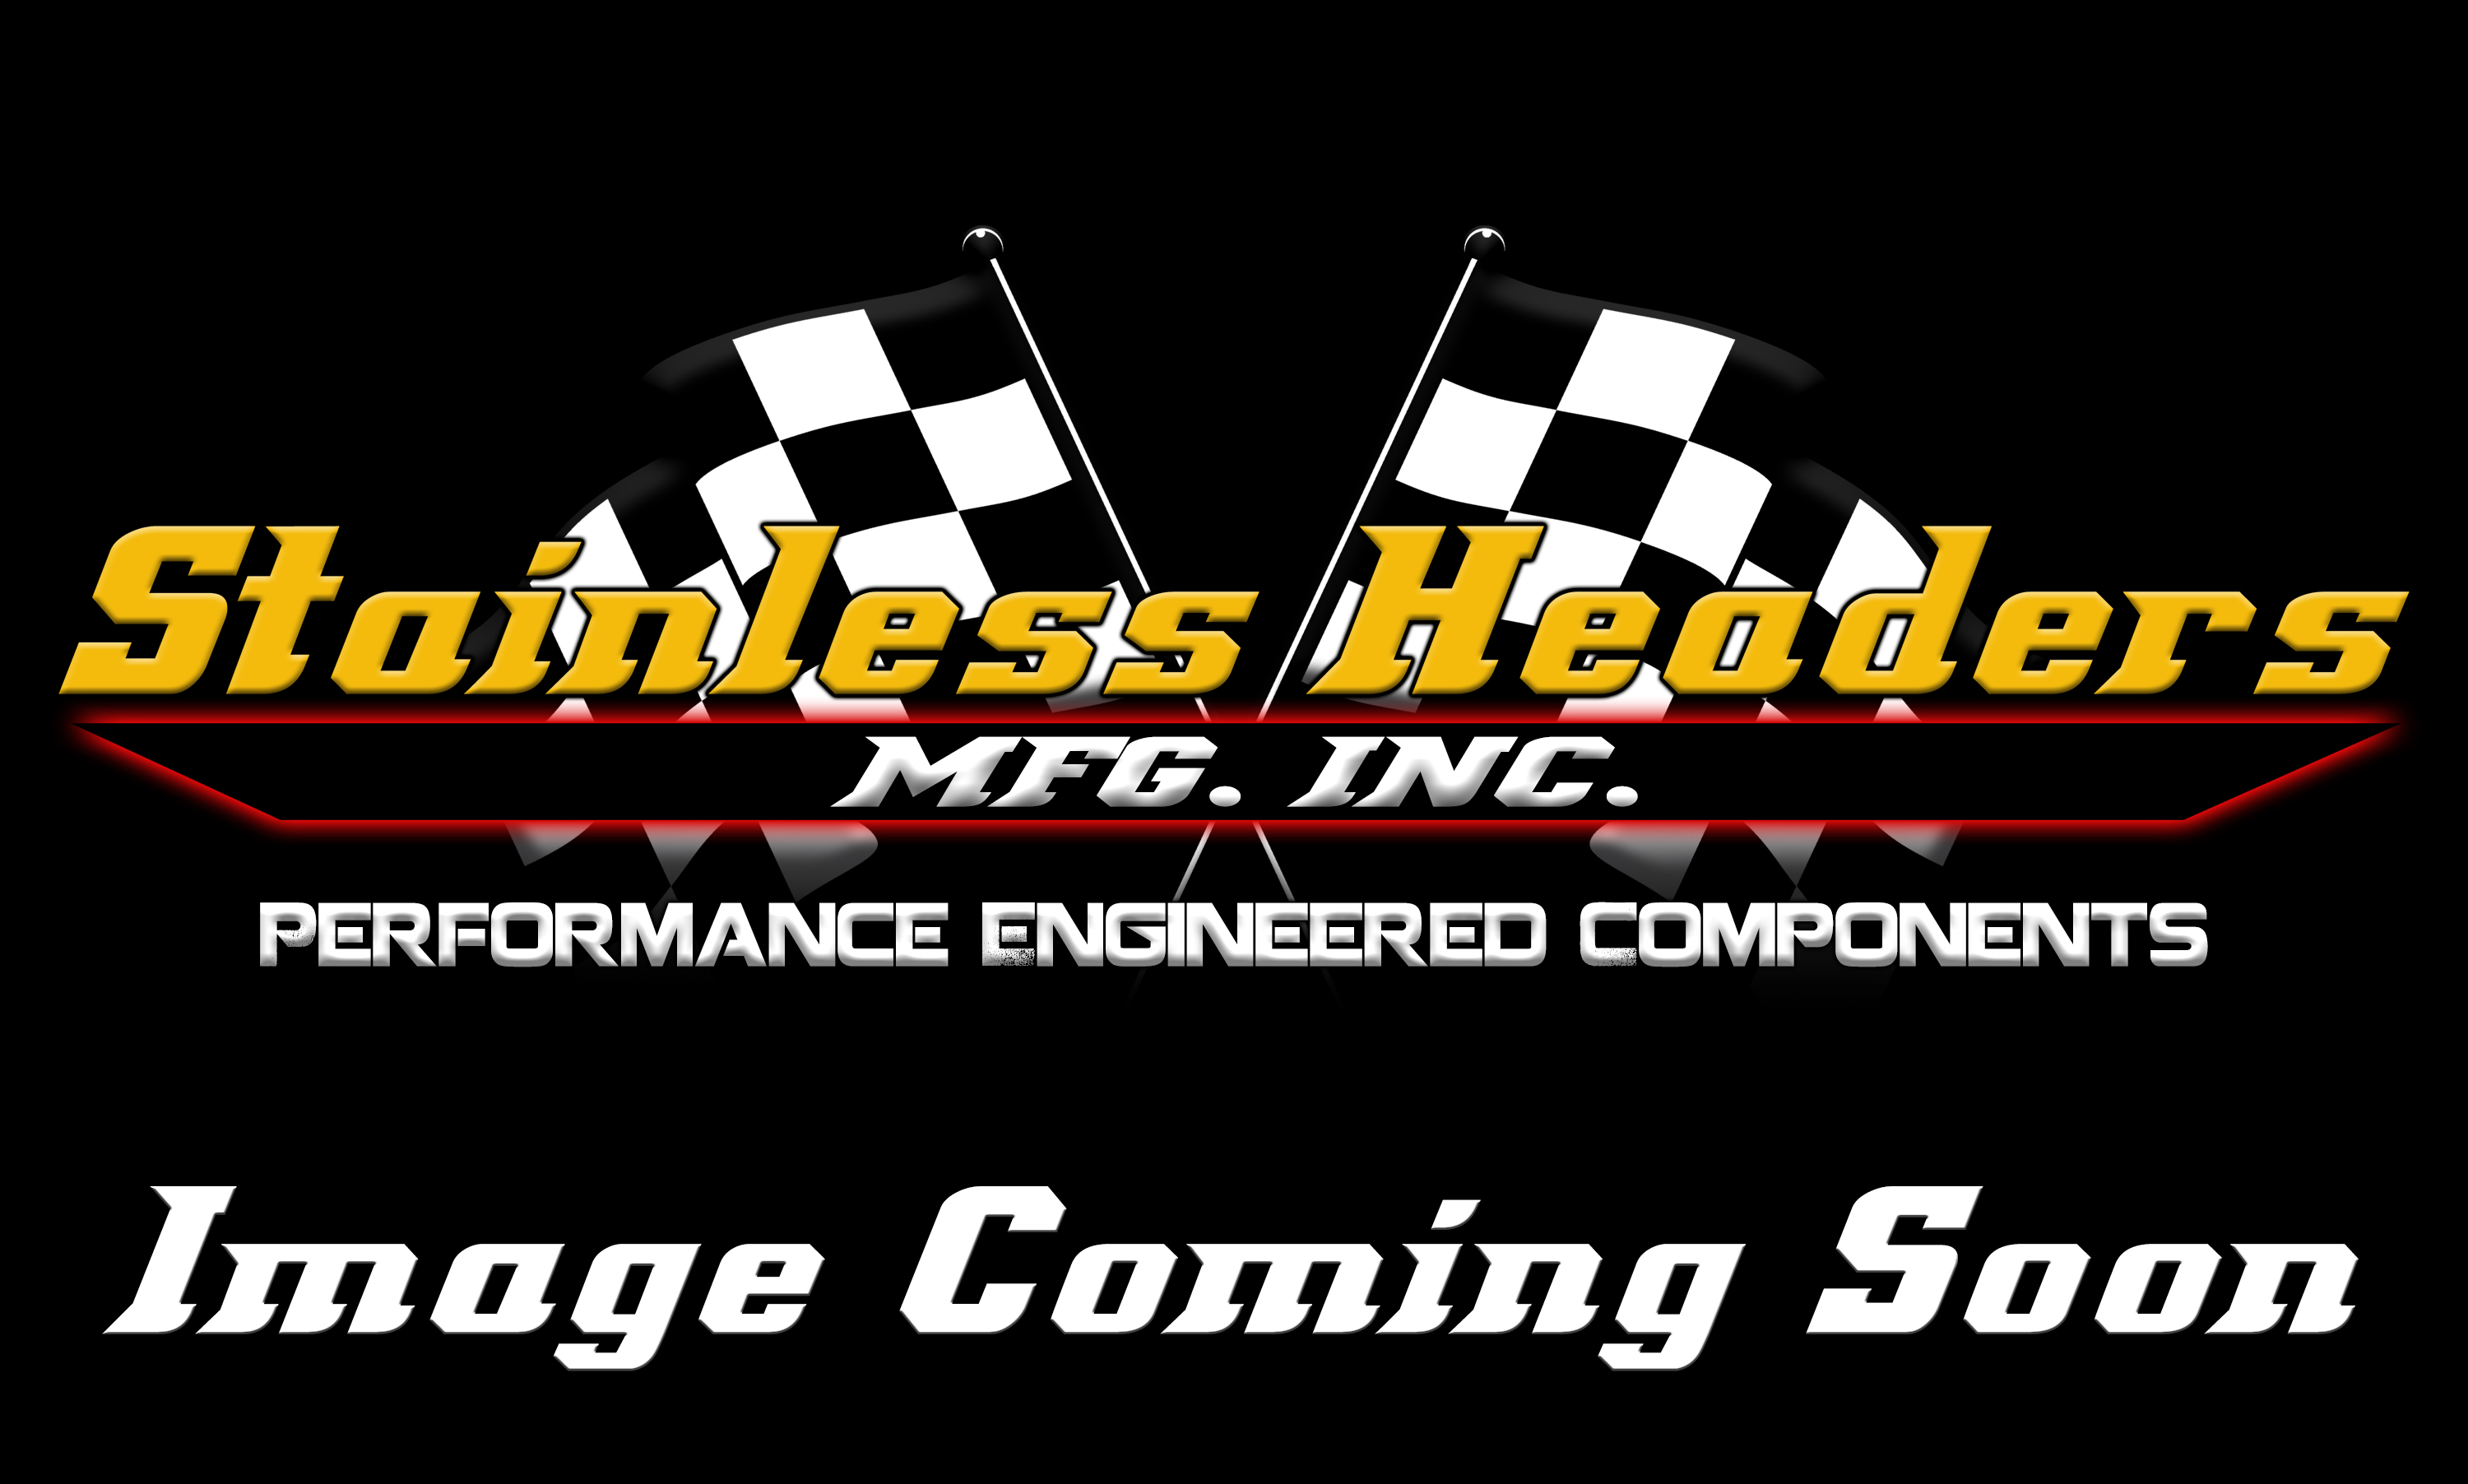 Stainless Headers - 2 1/8" Primary 4 into 1 Performance Merge Collector-16ga 321ss - Image 1